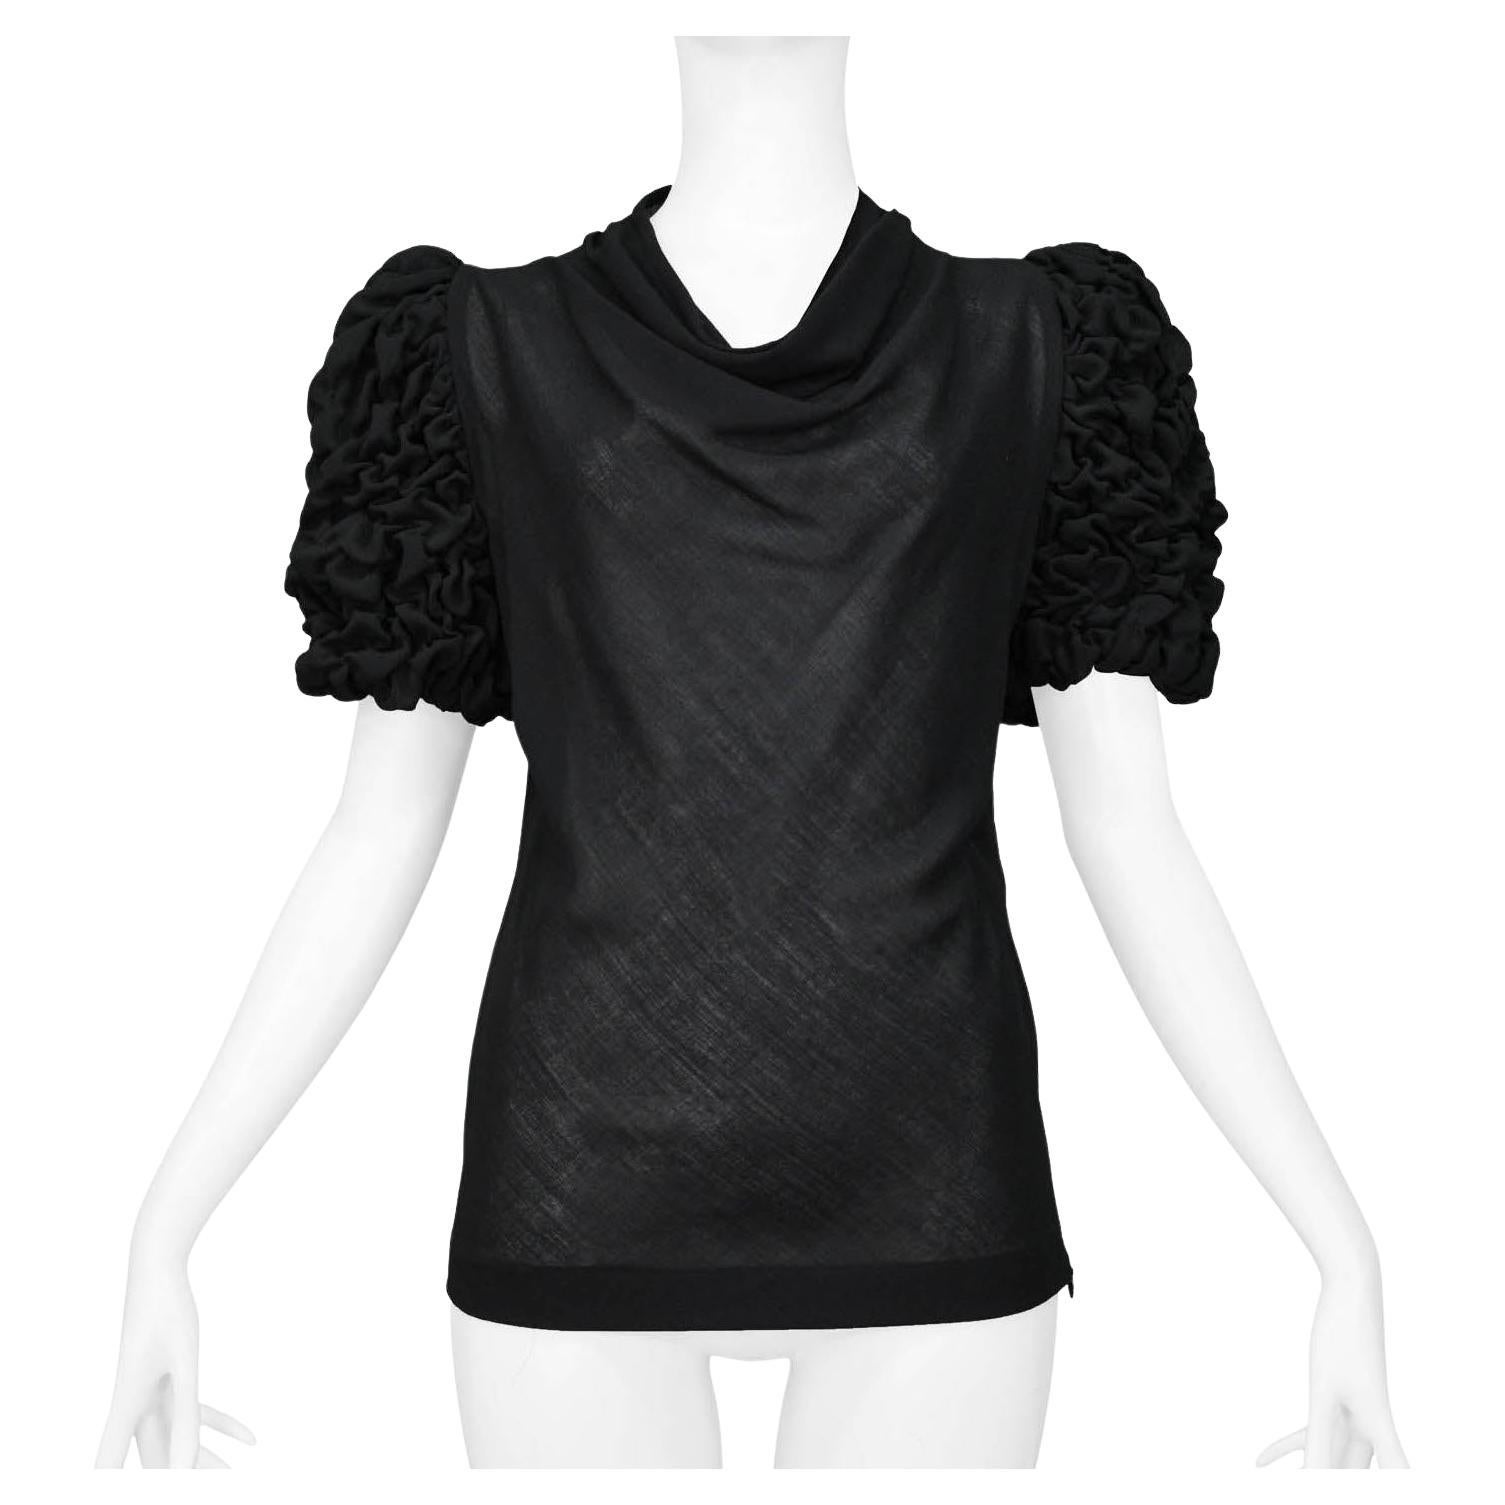 Alexander McQueen Black Top With Puckered Shoulders AW 1999 Overlook Collection For Sale